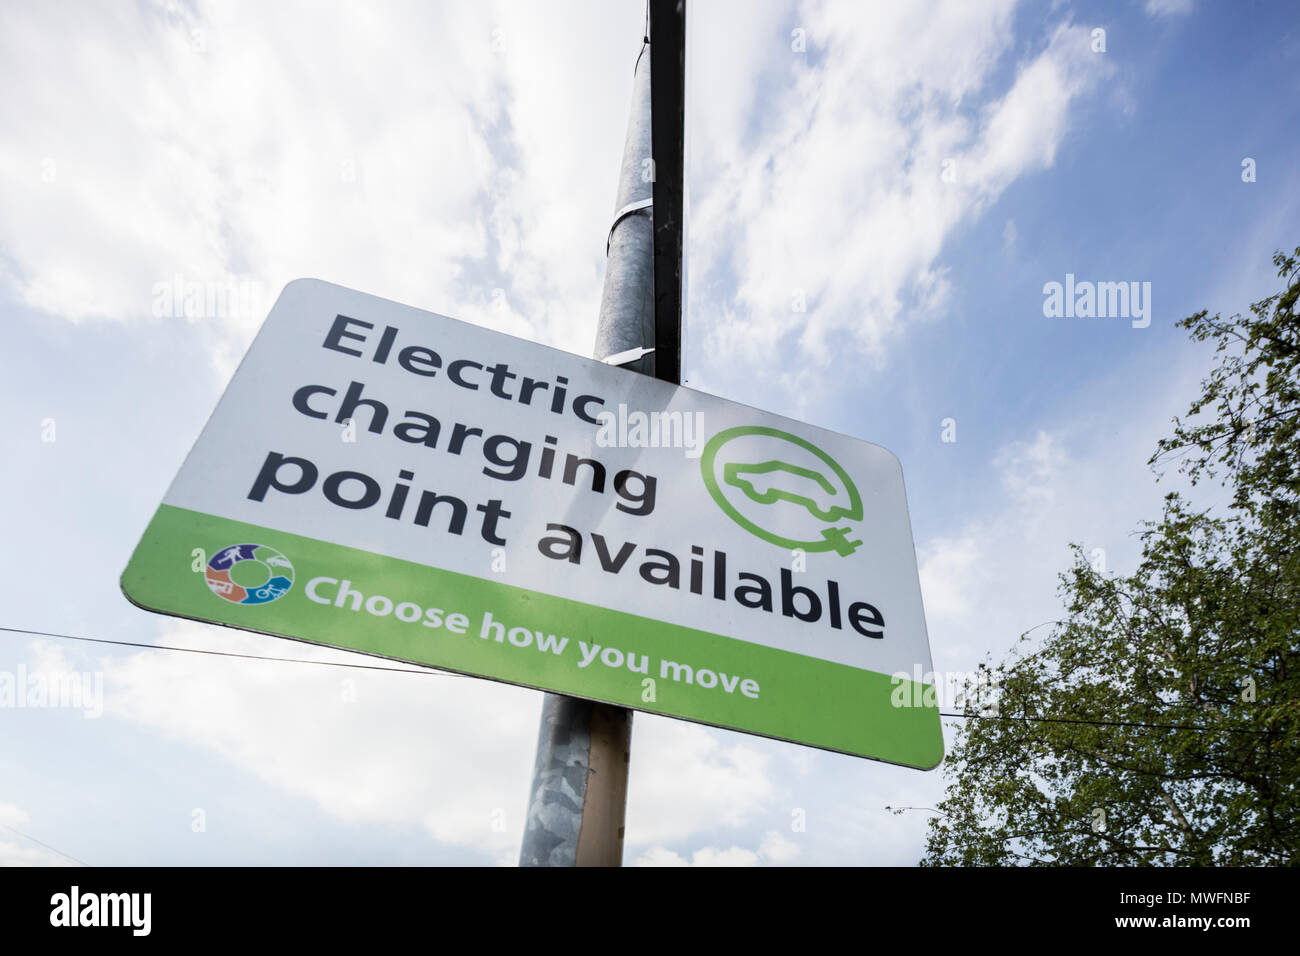 Sign for a electric charging point in a carpark, England, UK Stock Photo